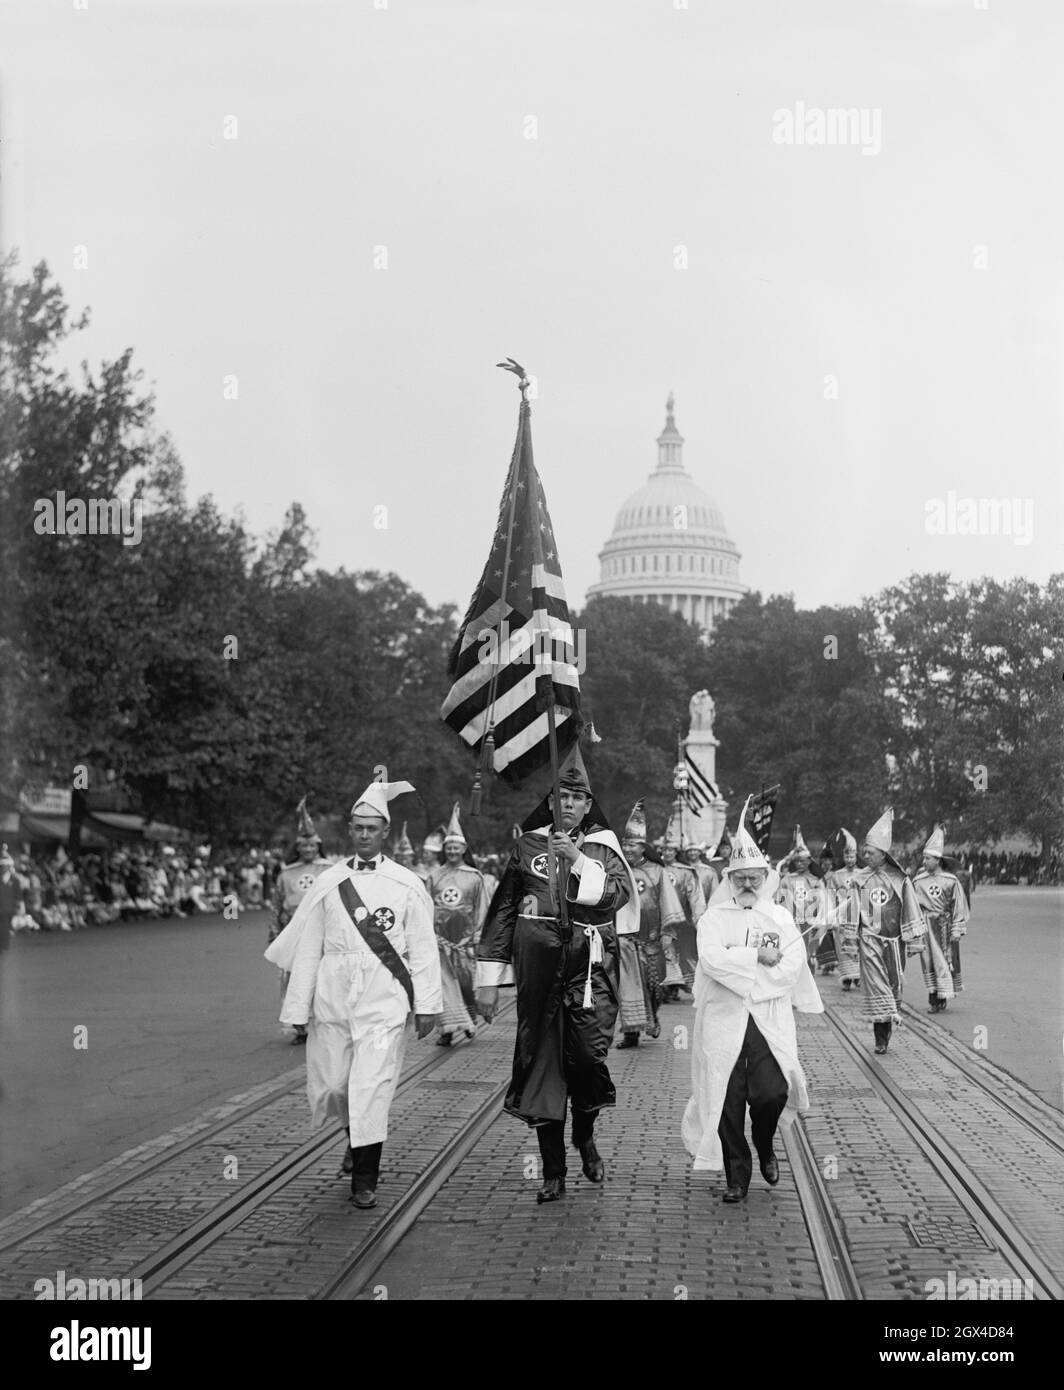 Vintage photo dated September 13th 1926 showing members of the Ku Klux Klan members dressed in robes parading down Pennsylvania Avenue in Washington, D.C. with the stars and stripes flag and Capitol dome in the background Stock Photo